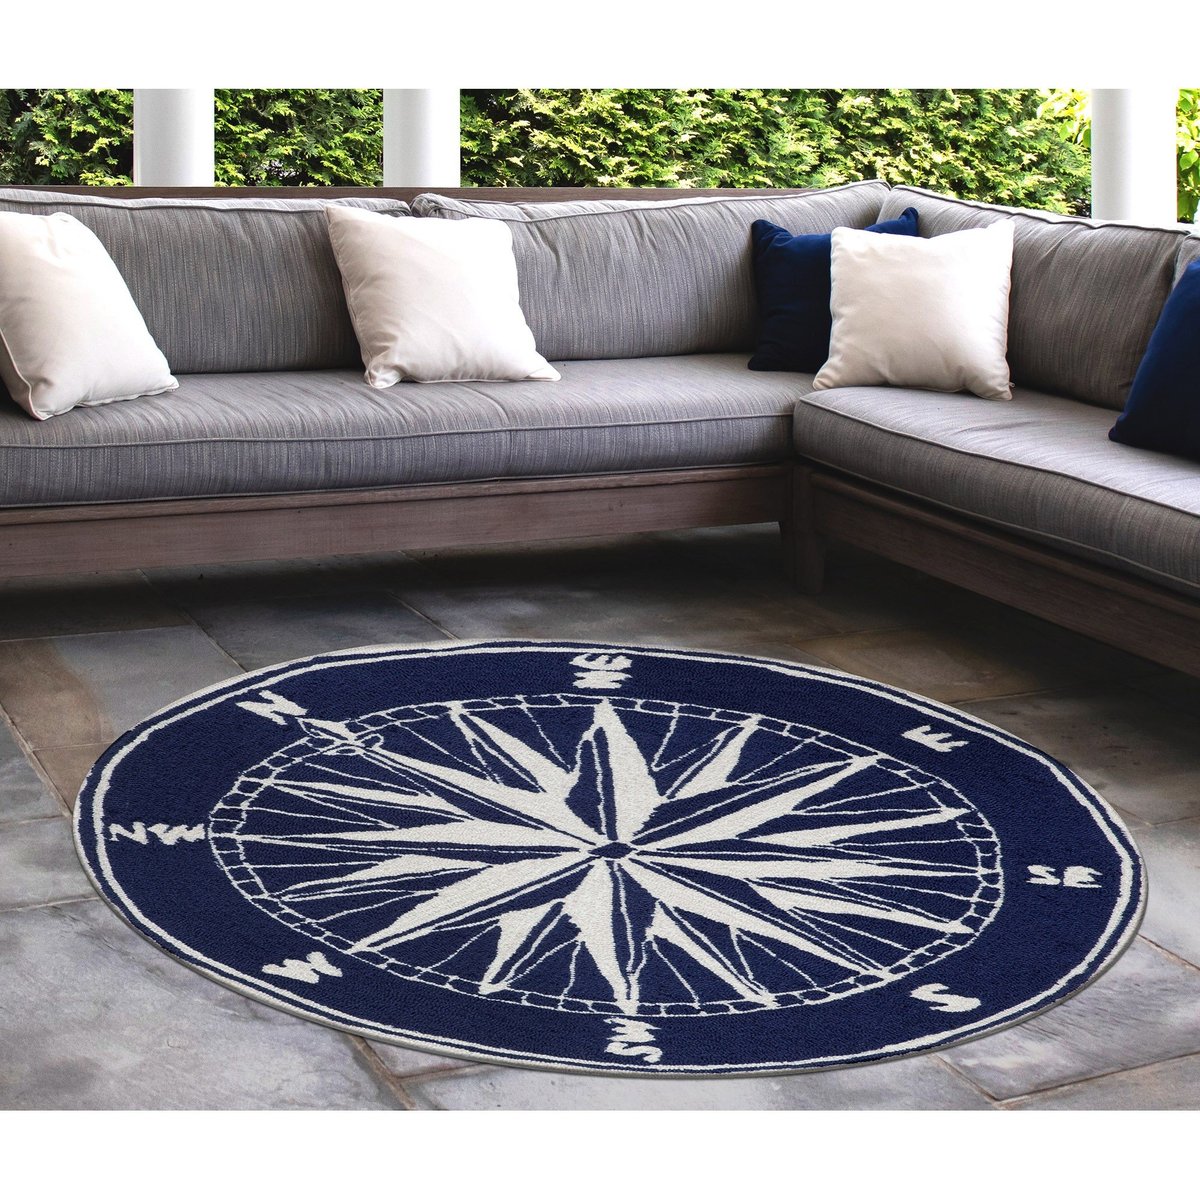 Liora Manne Front Porch Compass Rugs, Nautical Compass Rug